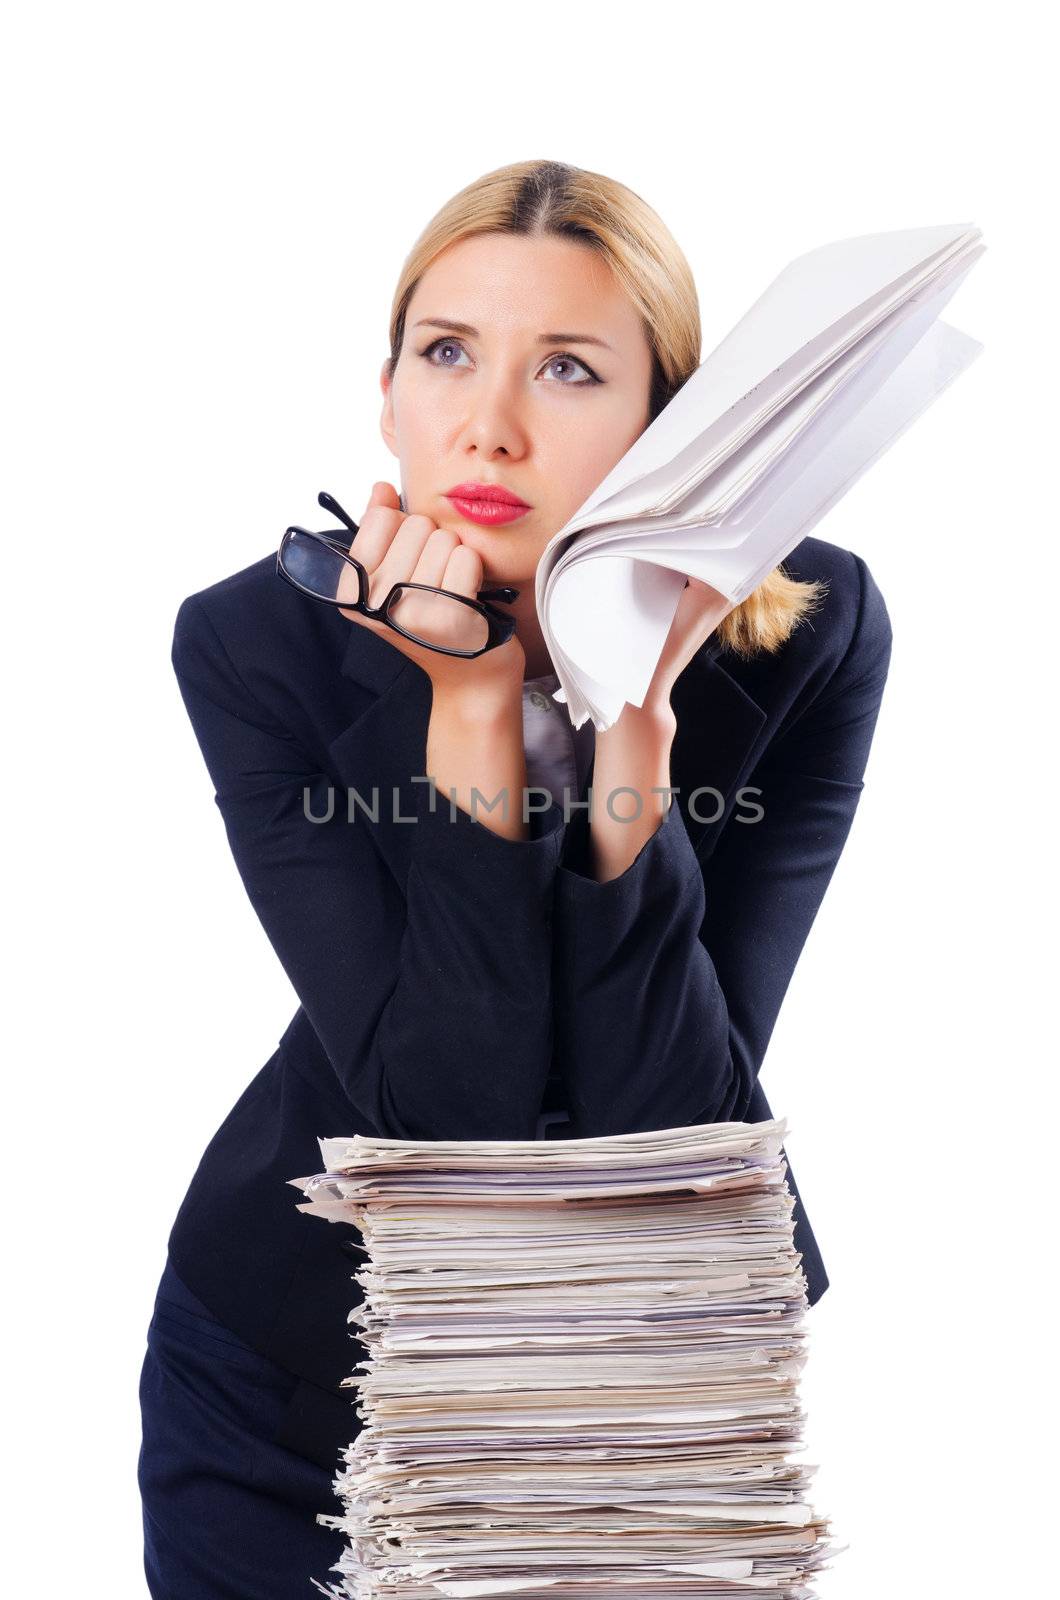 Woman businesswoman with lots of papers